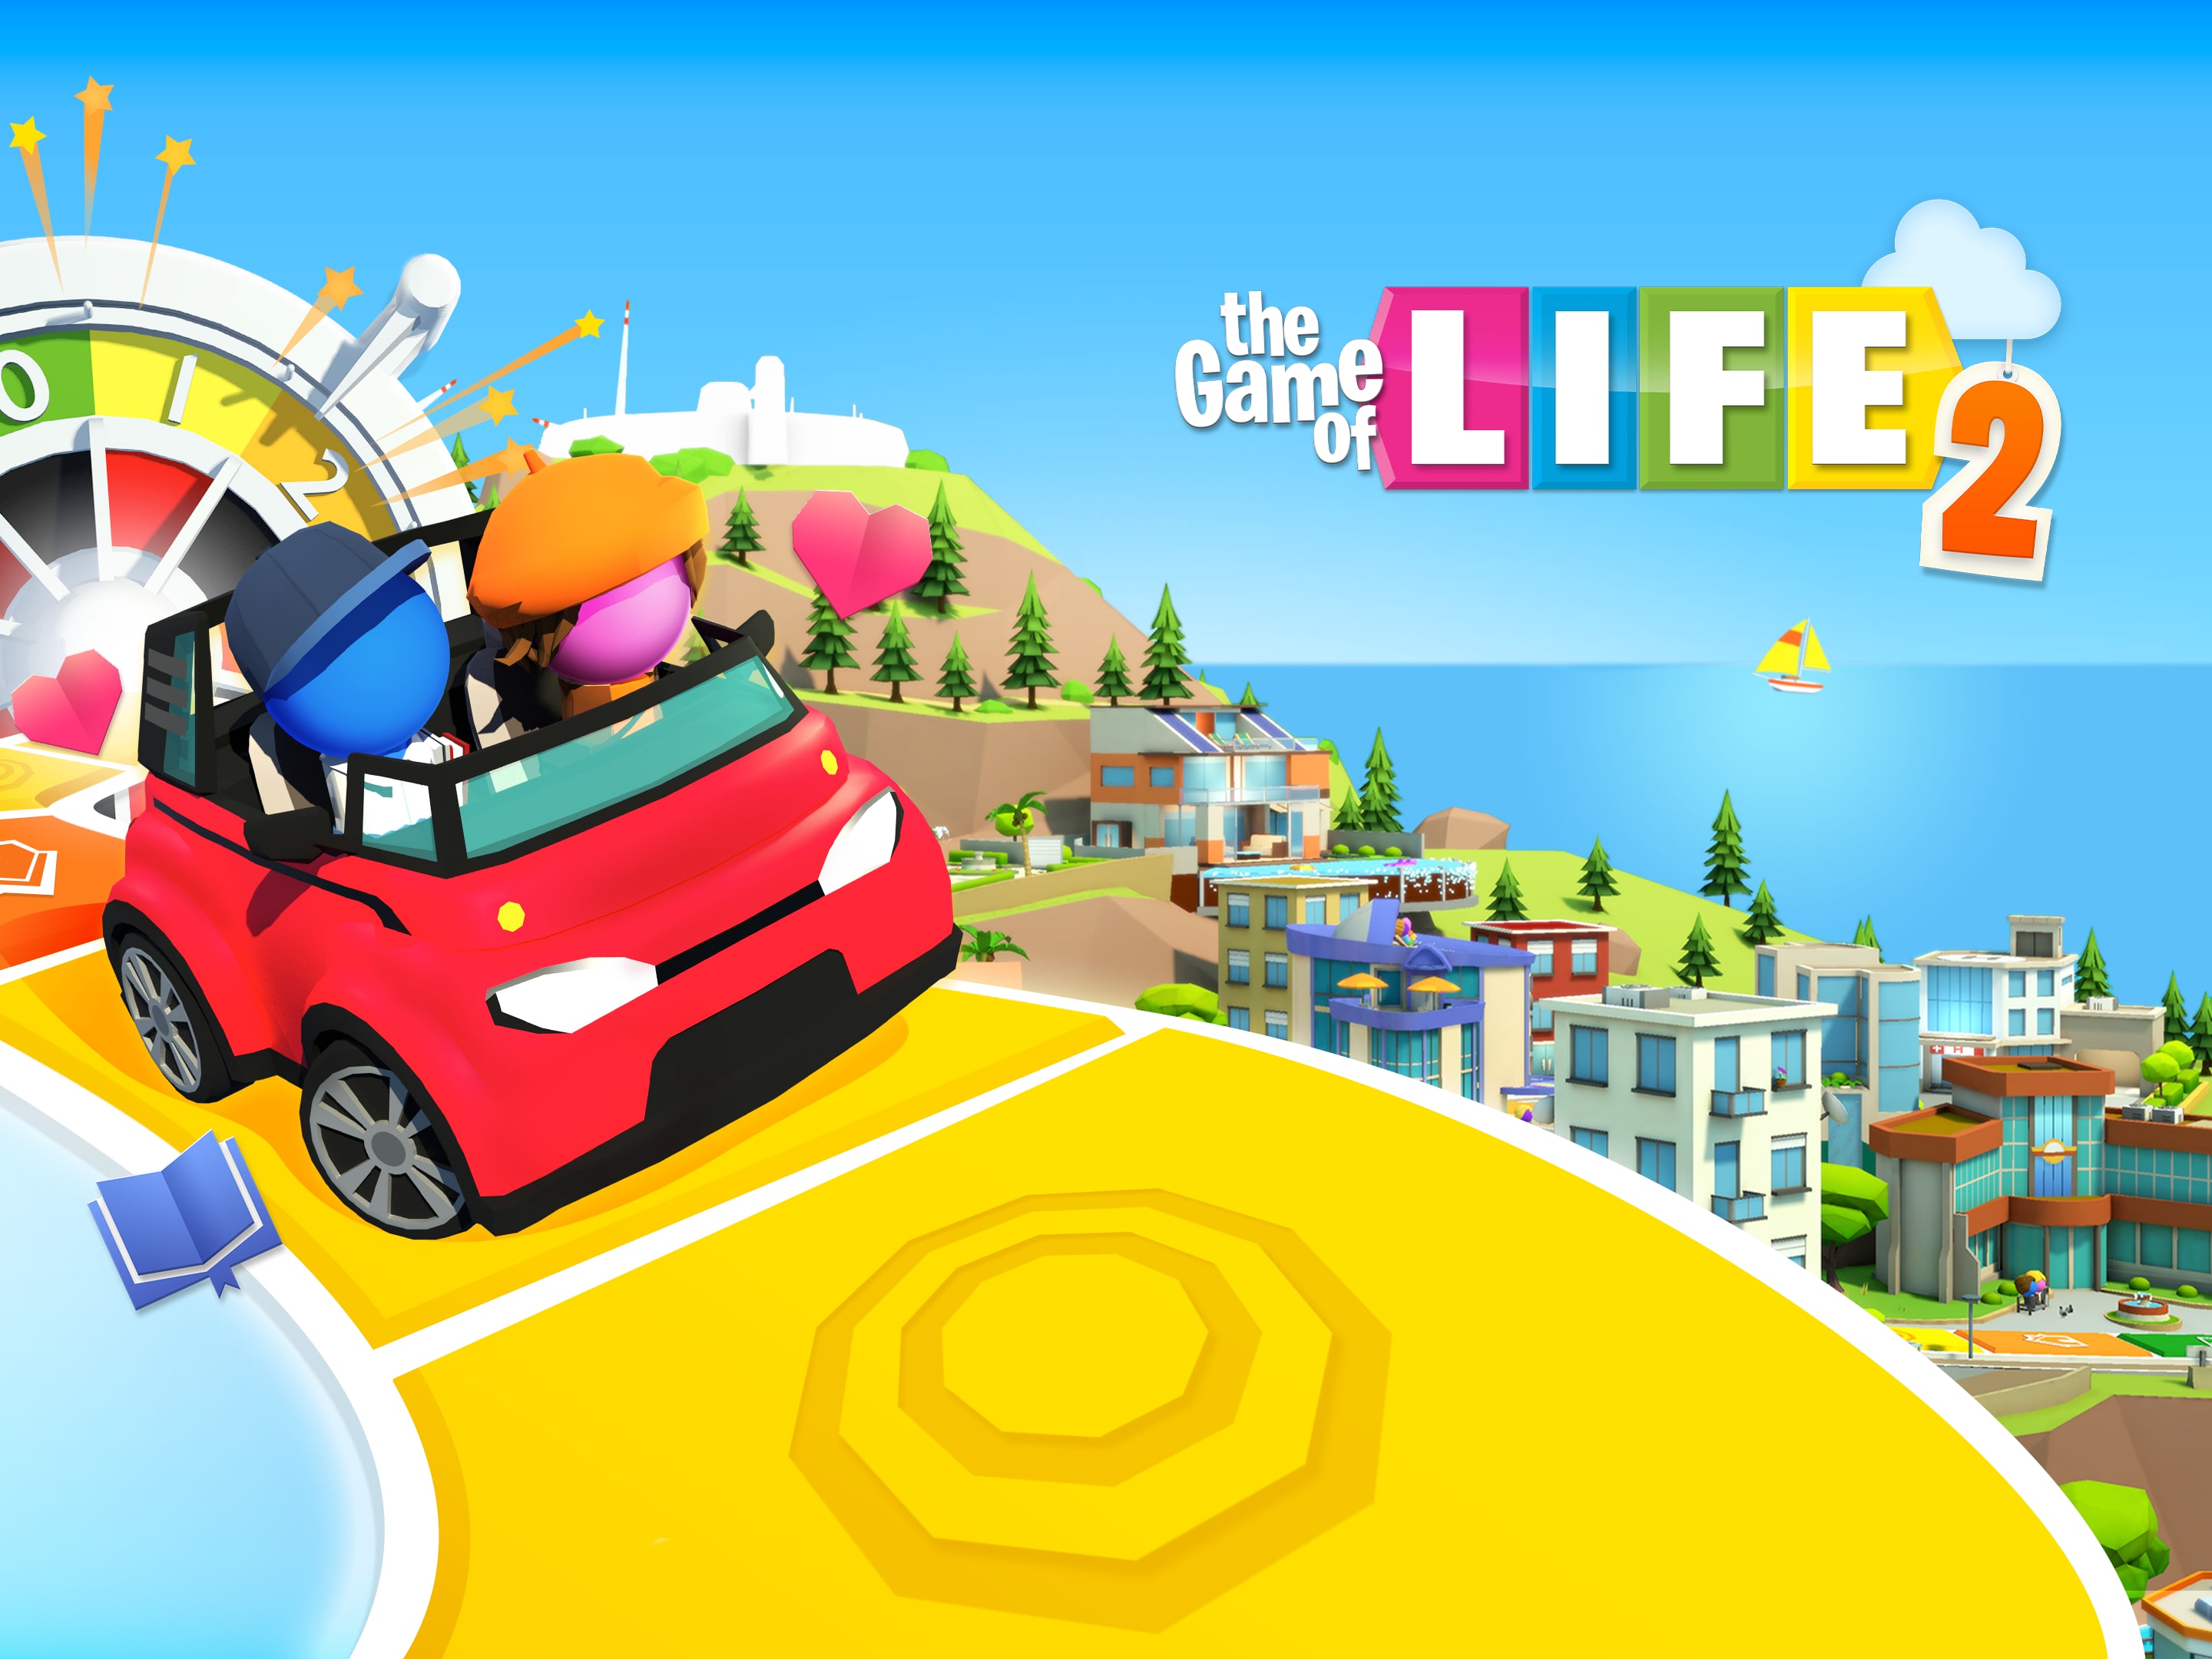 How long is The Game of Life 2?